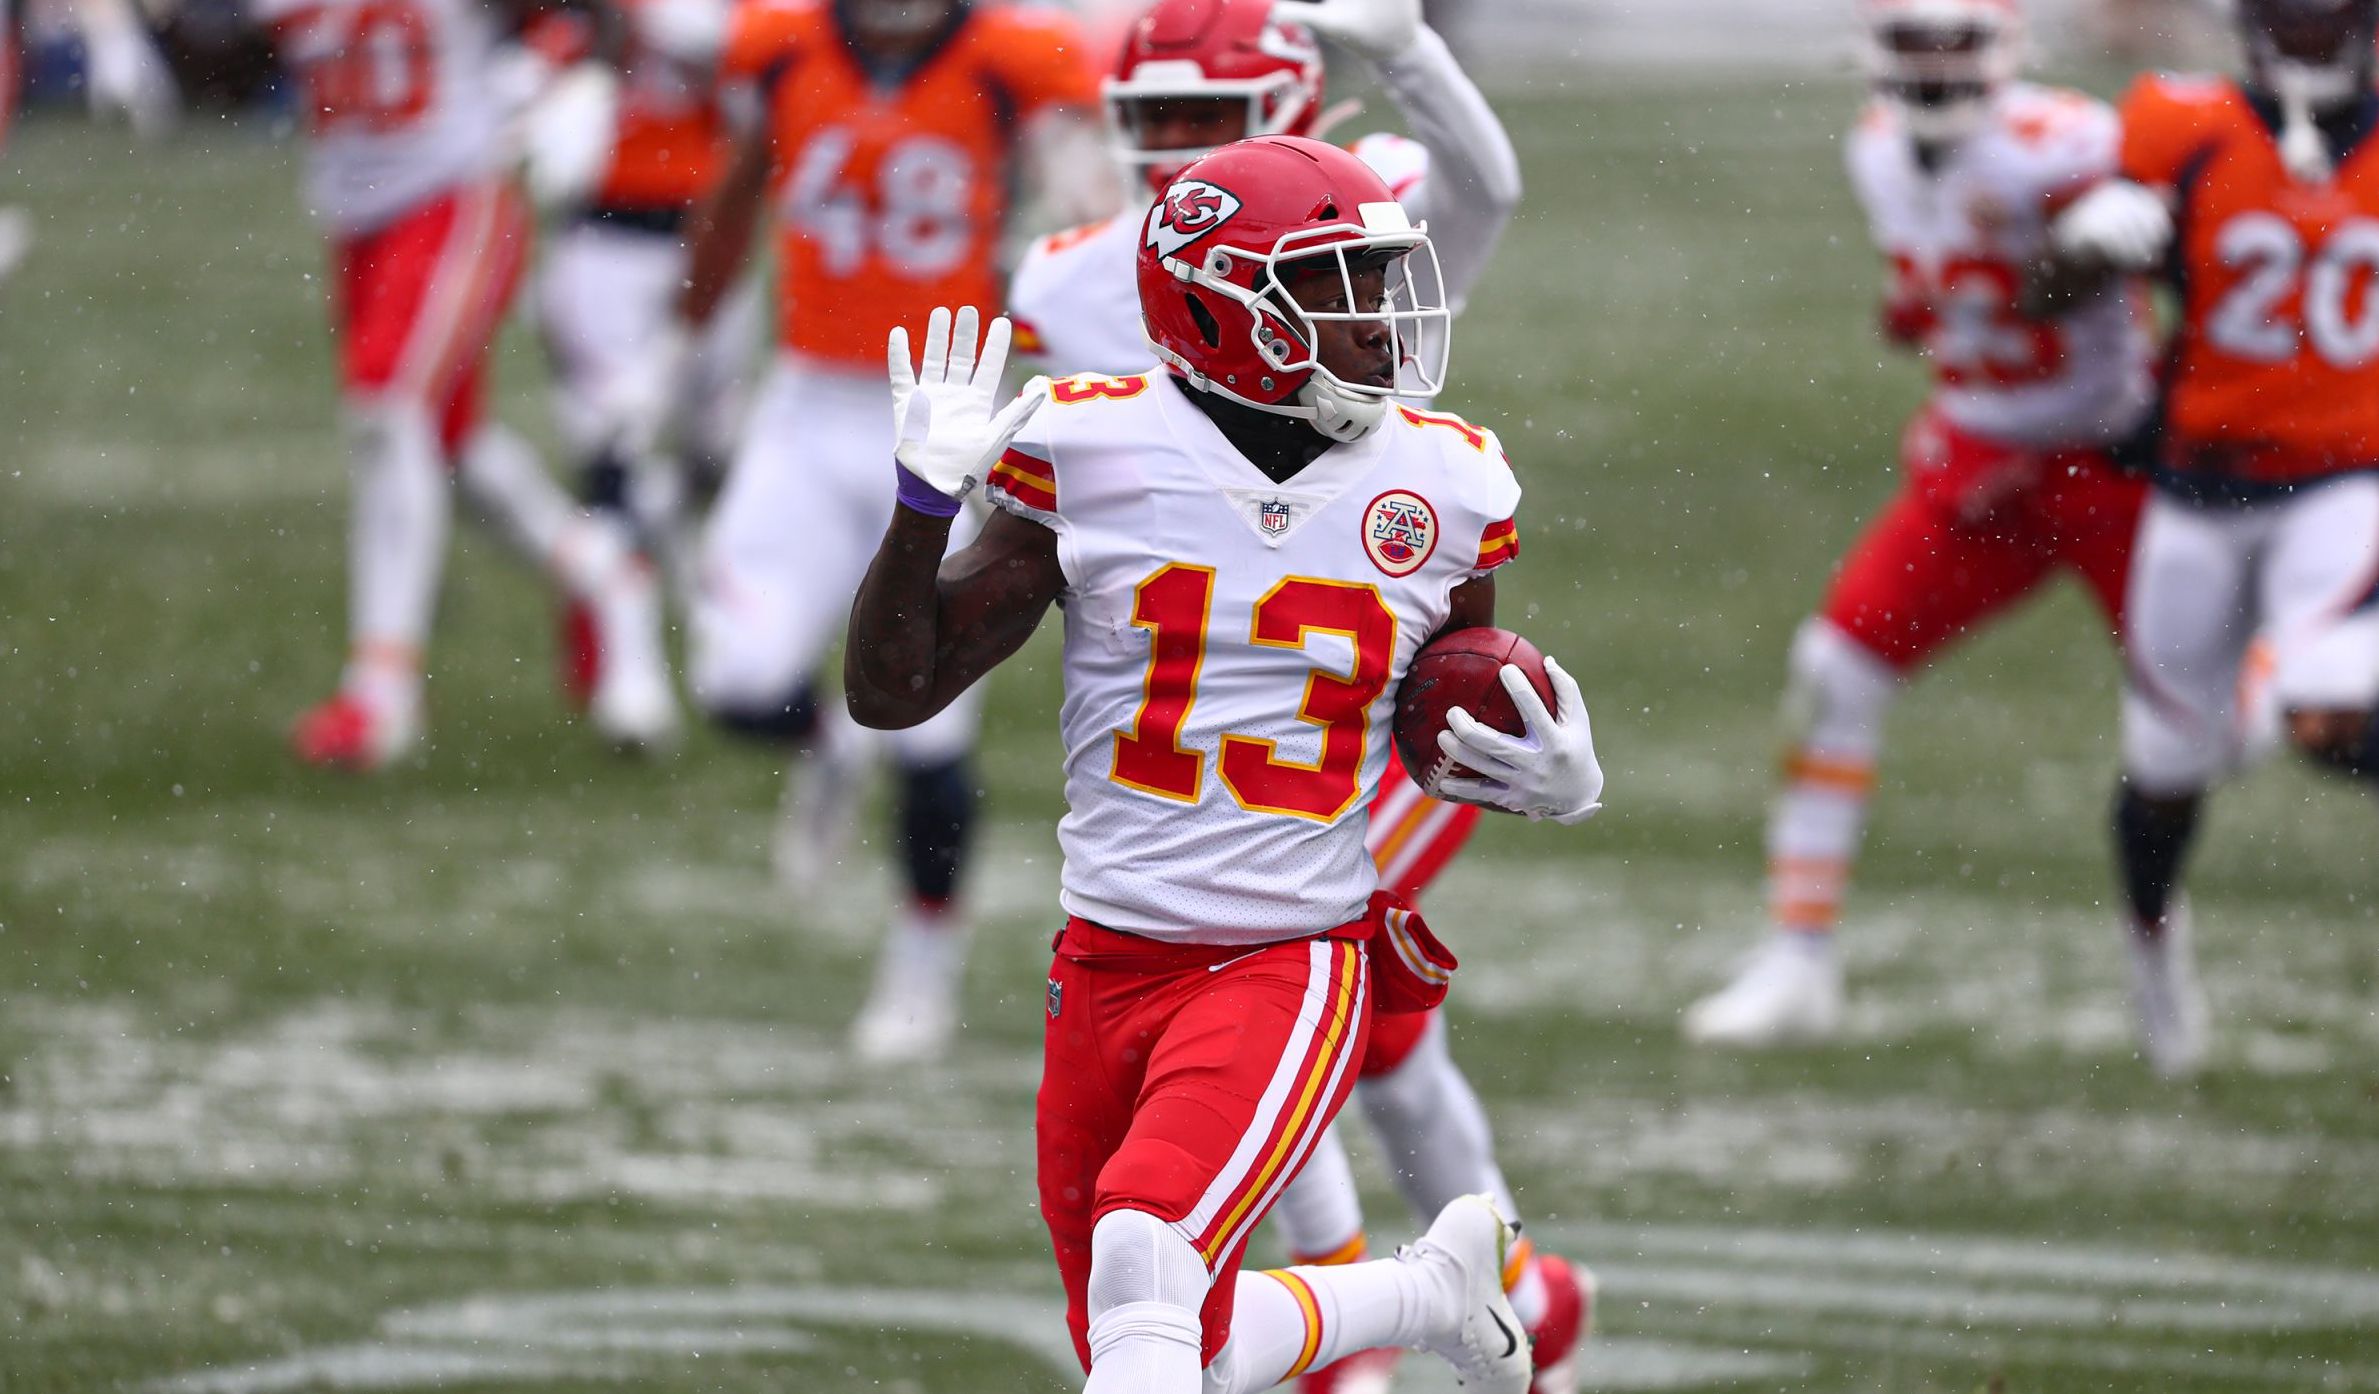 Byron Pringle Sparks Chiefs Special Teams in 43-16 Routing of Broncos